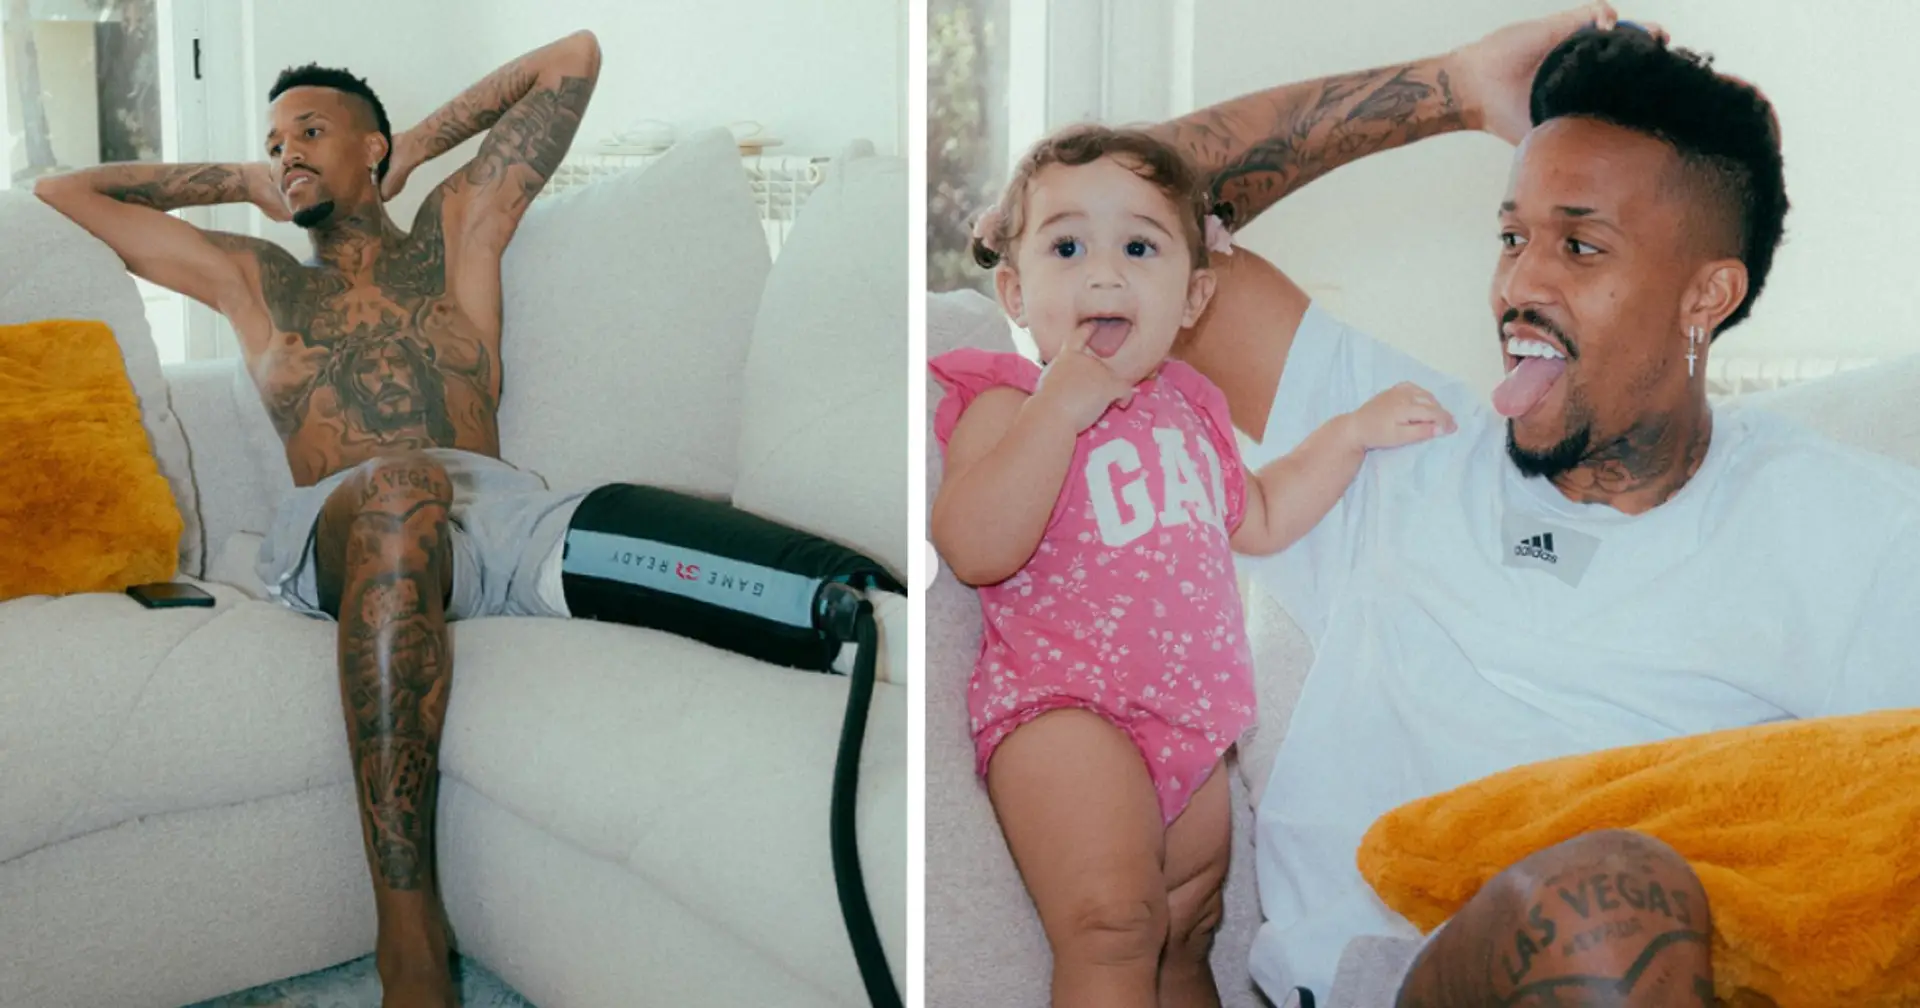 Militao shares first pictures after knee surgery, encouraged by his adorable daughter